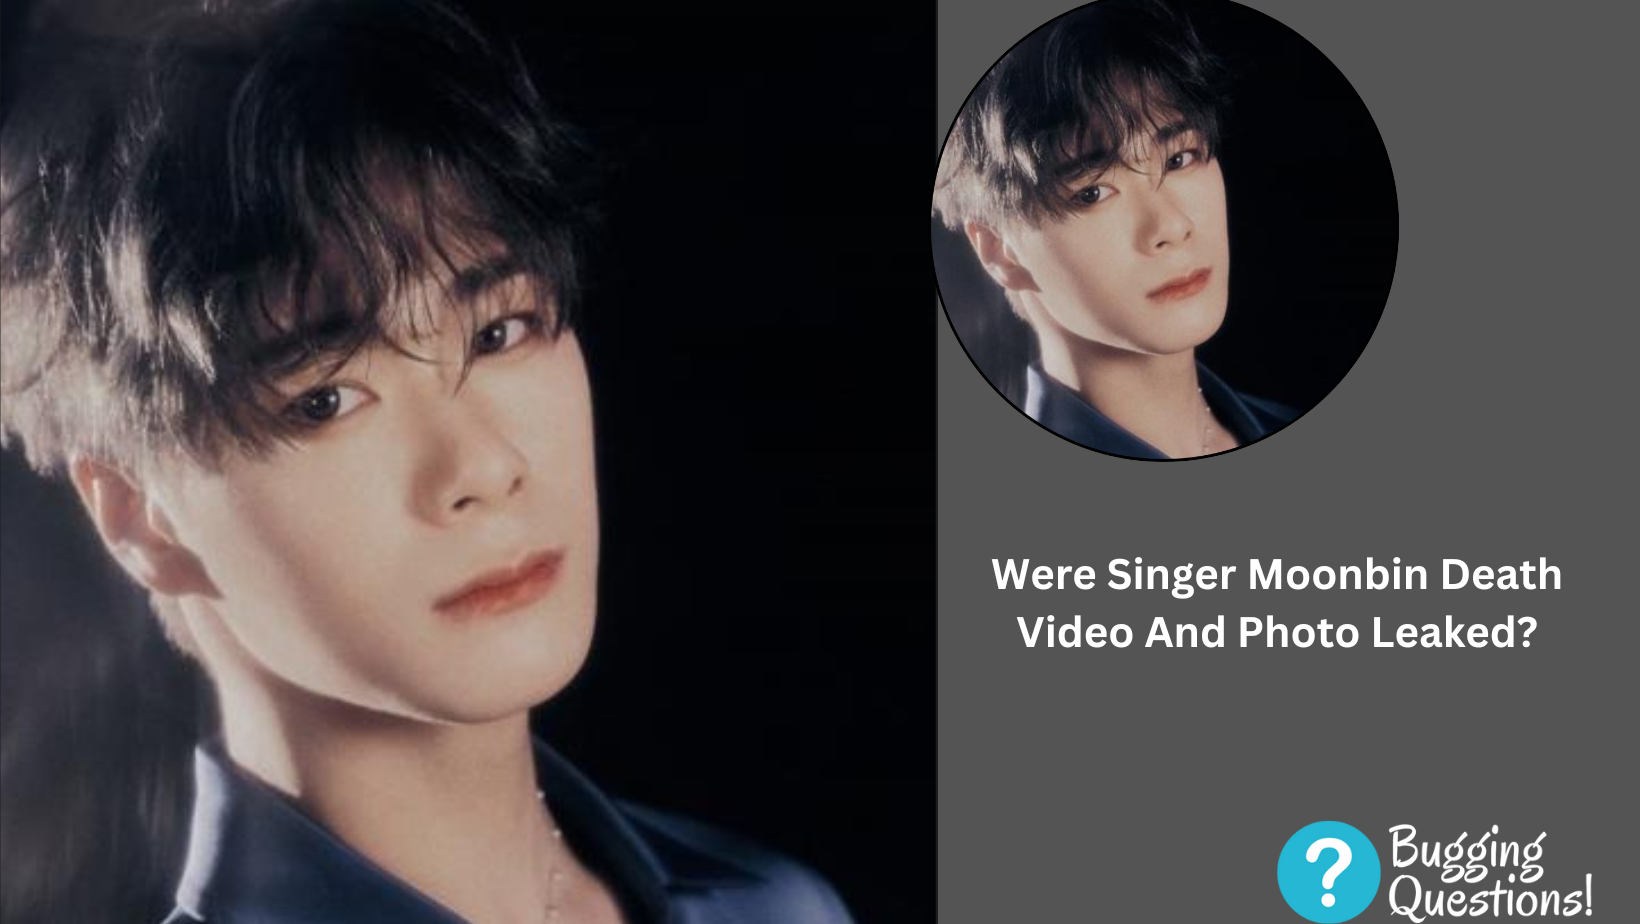 Were Singer Moonbin Death Video And Photo Leaked?